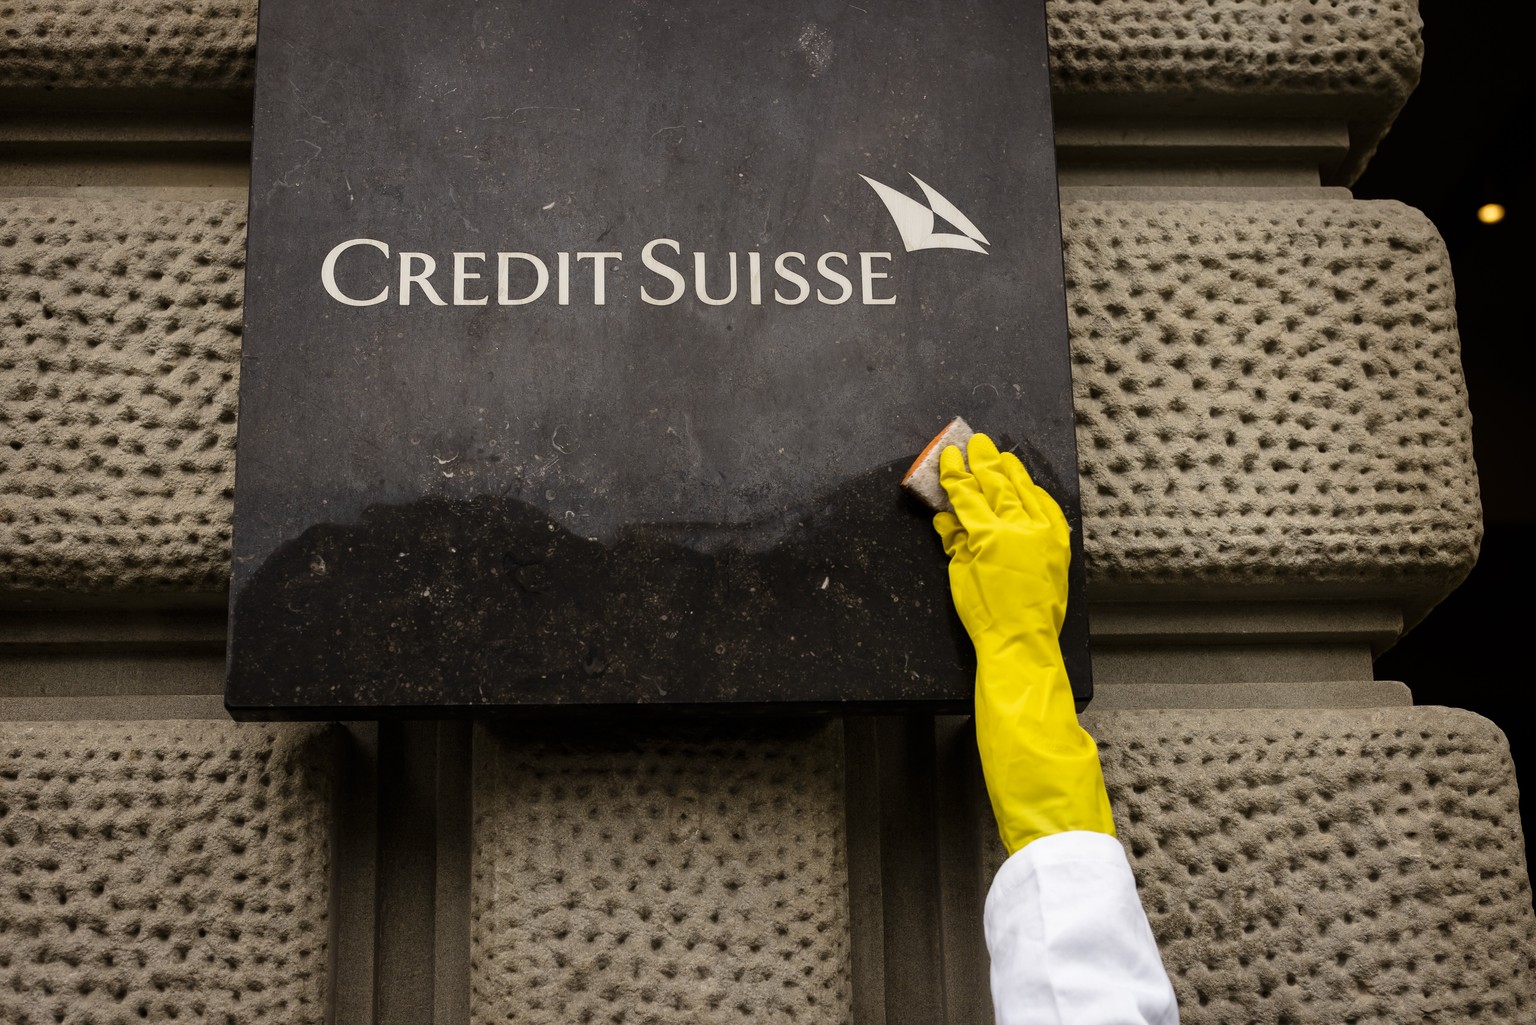 An activist of Scientist Rebellion cleans symbolically.the entrance of the Swiss Bank Credit Suisse at Paradeplatz during a protest against fossil fuel investments, in Zurich, Switzerland on Wednesday ...